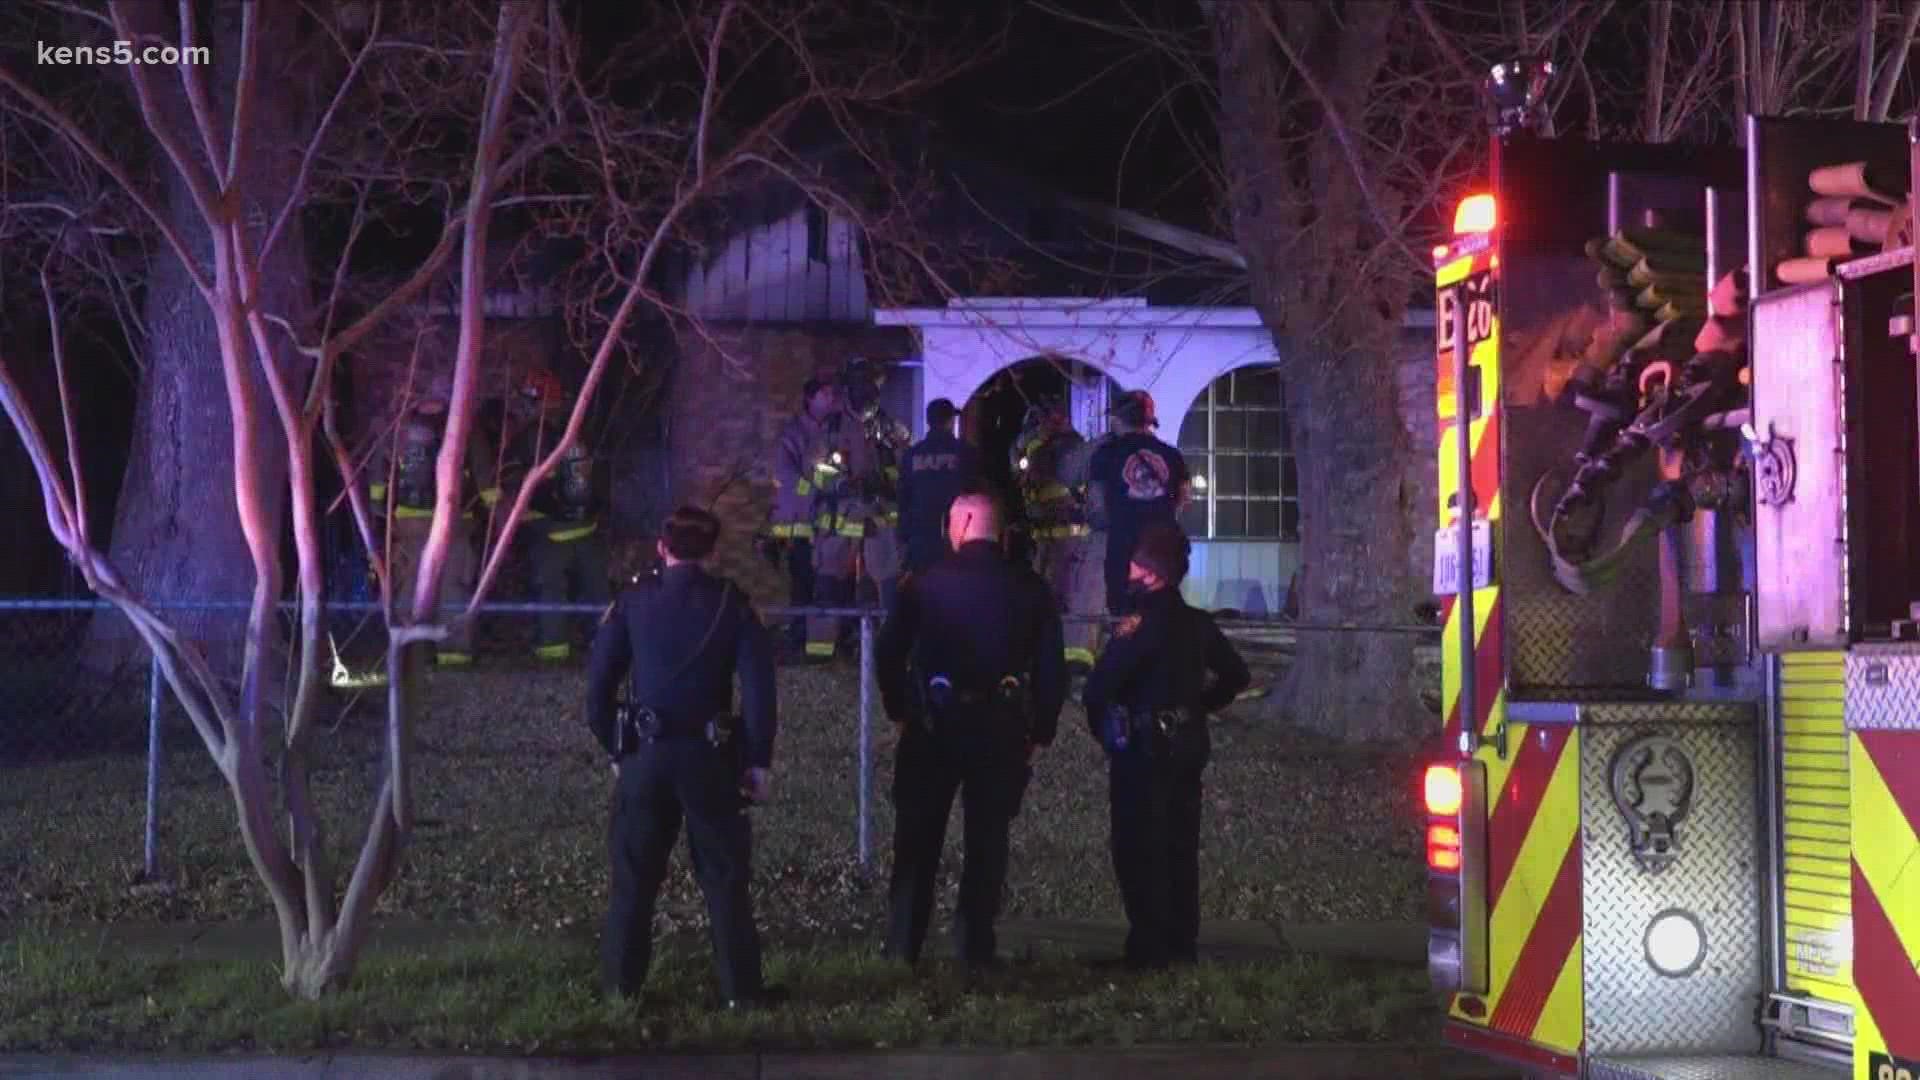 Investigators from the San Antonio Fire Department said the fire started in a front room of the home and then spread to the attic and the rest of the home.